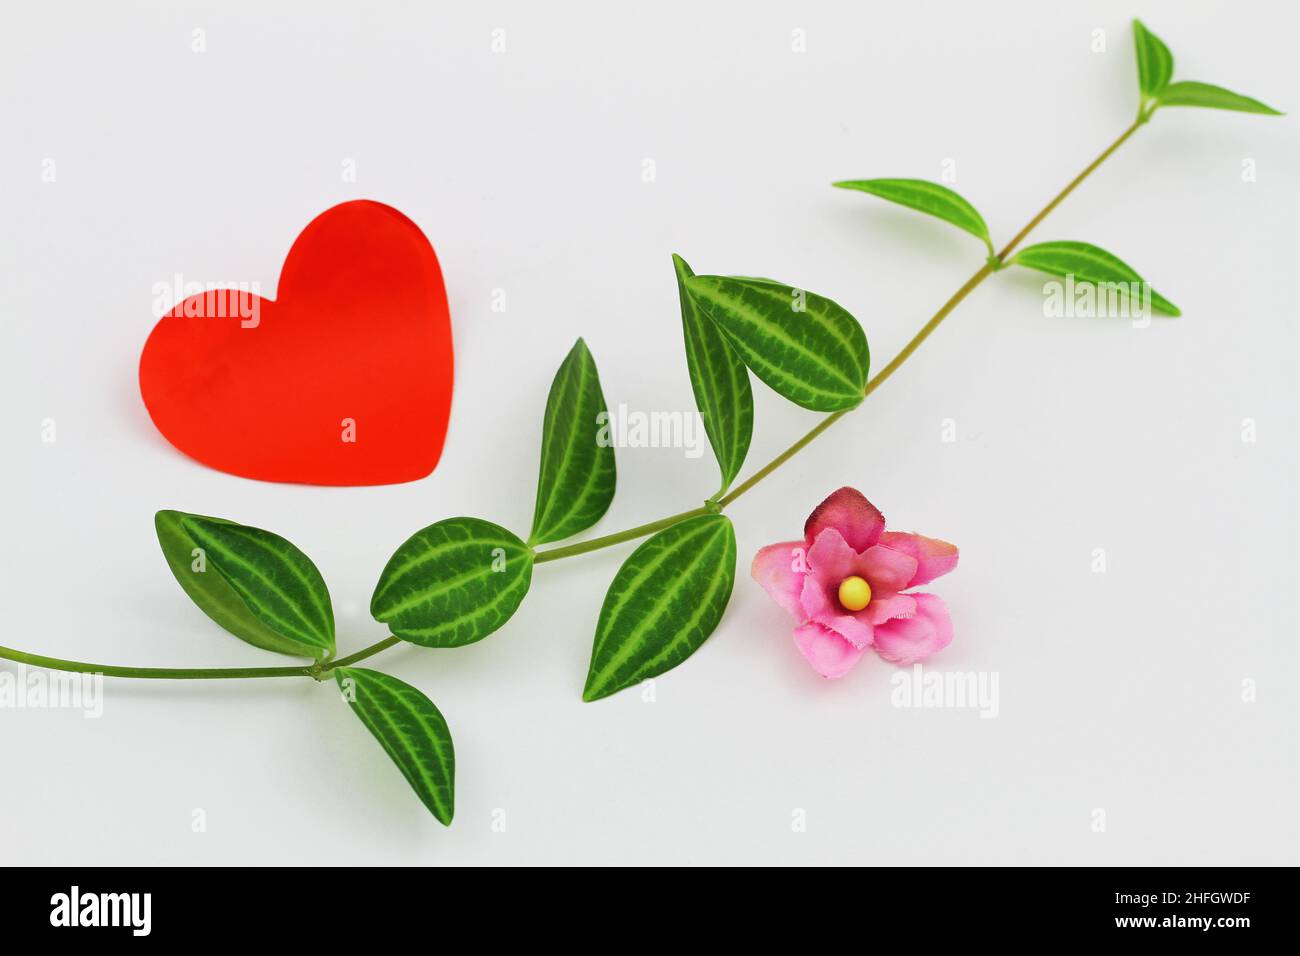 Red heart, green leaves and pink flower on white surface with copy space Stock Photo